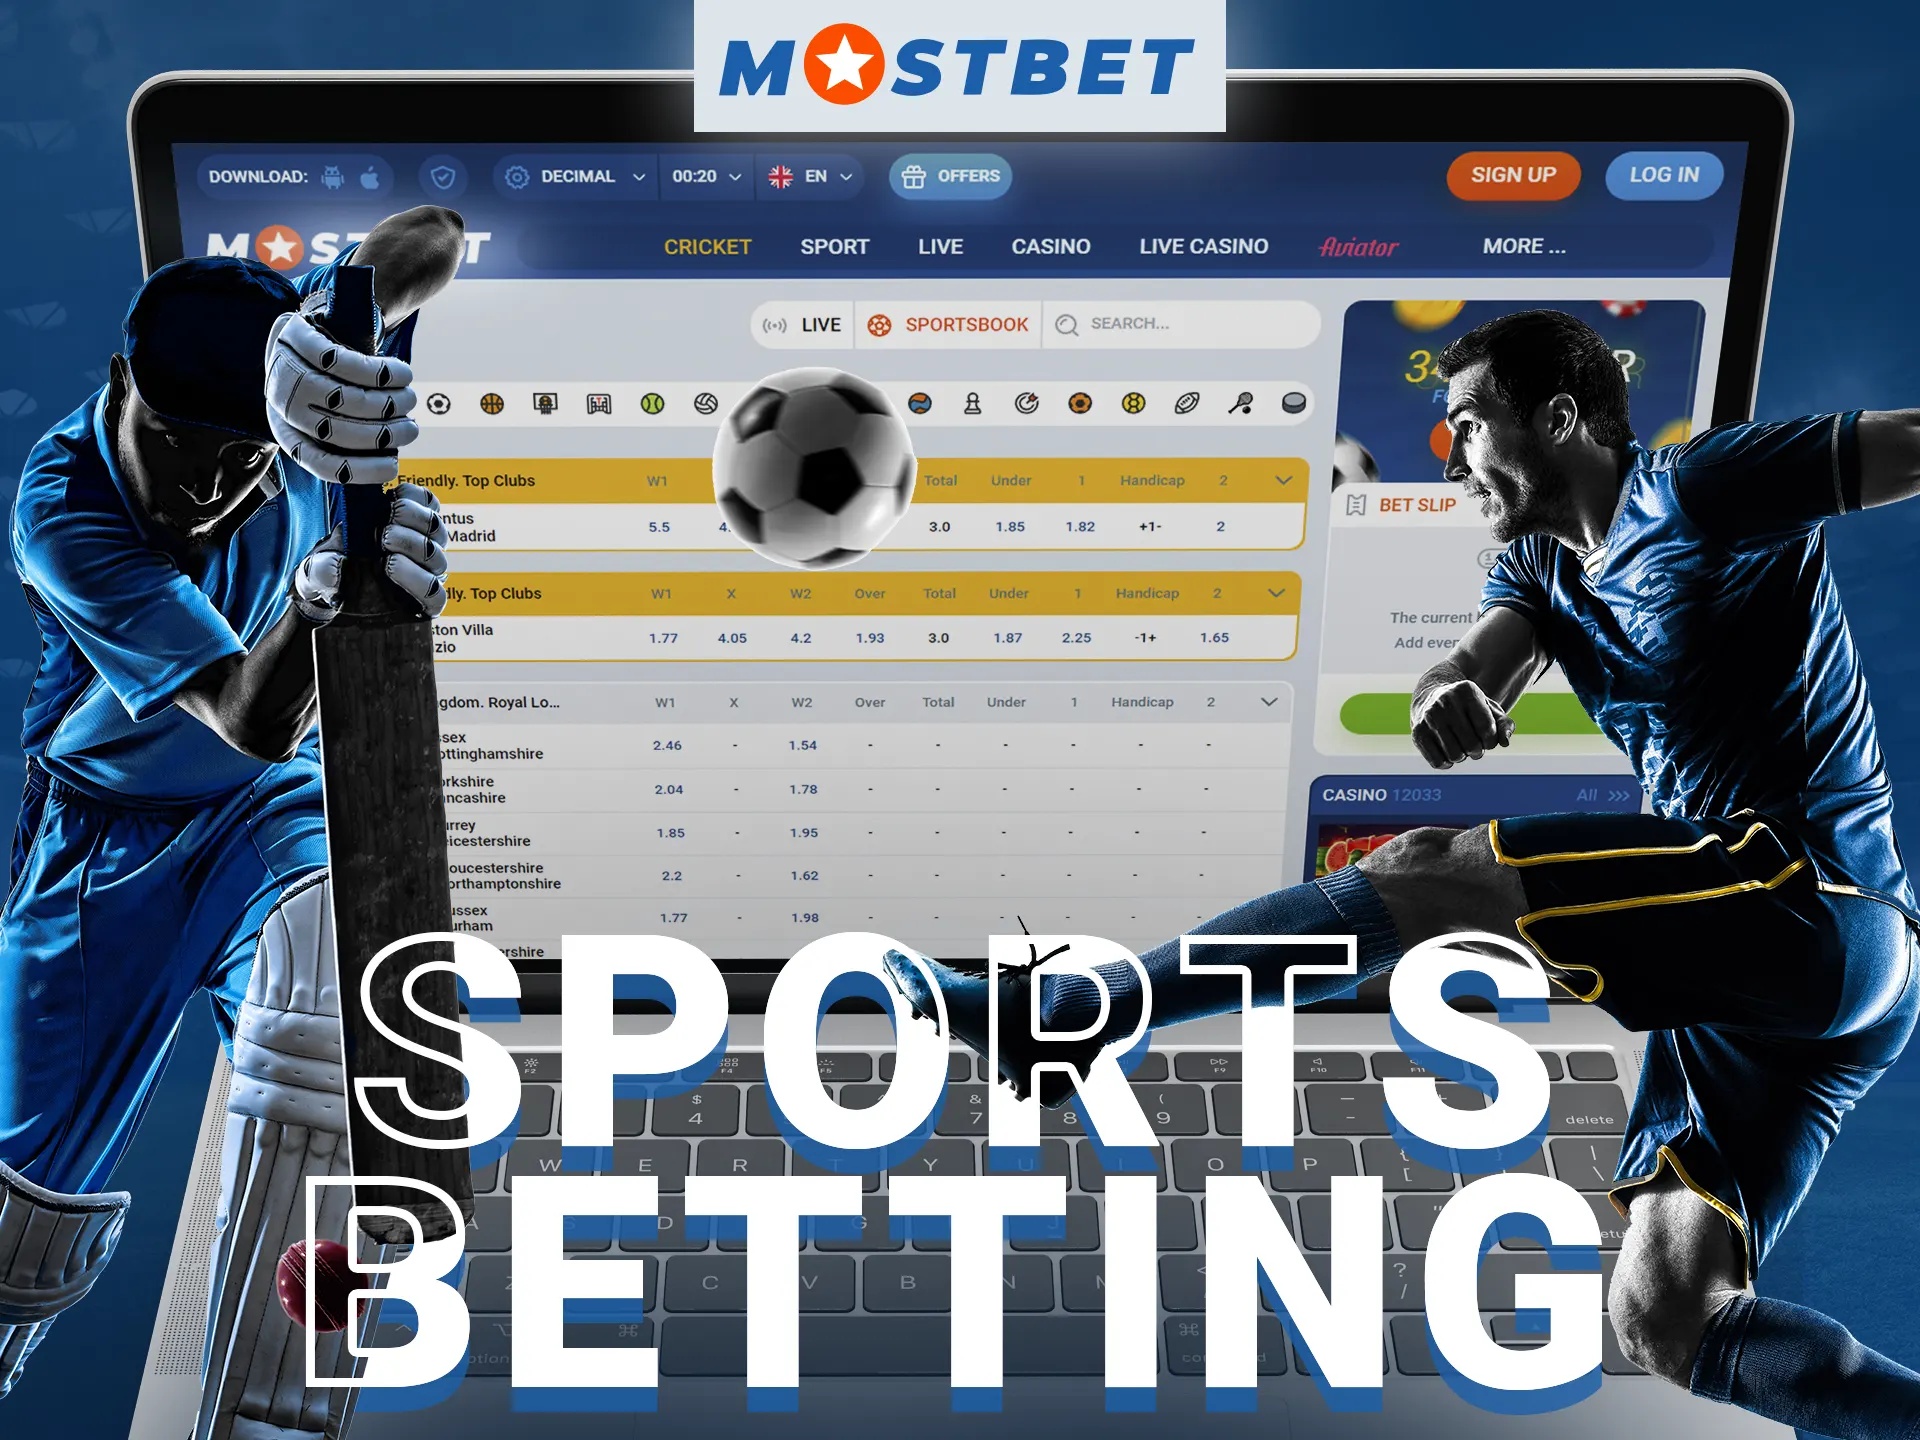 Bet on sports at Mostbet.